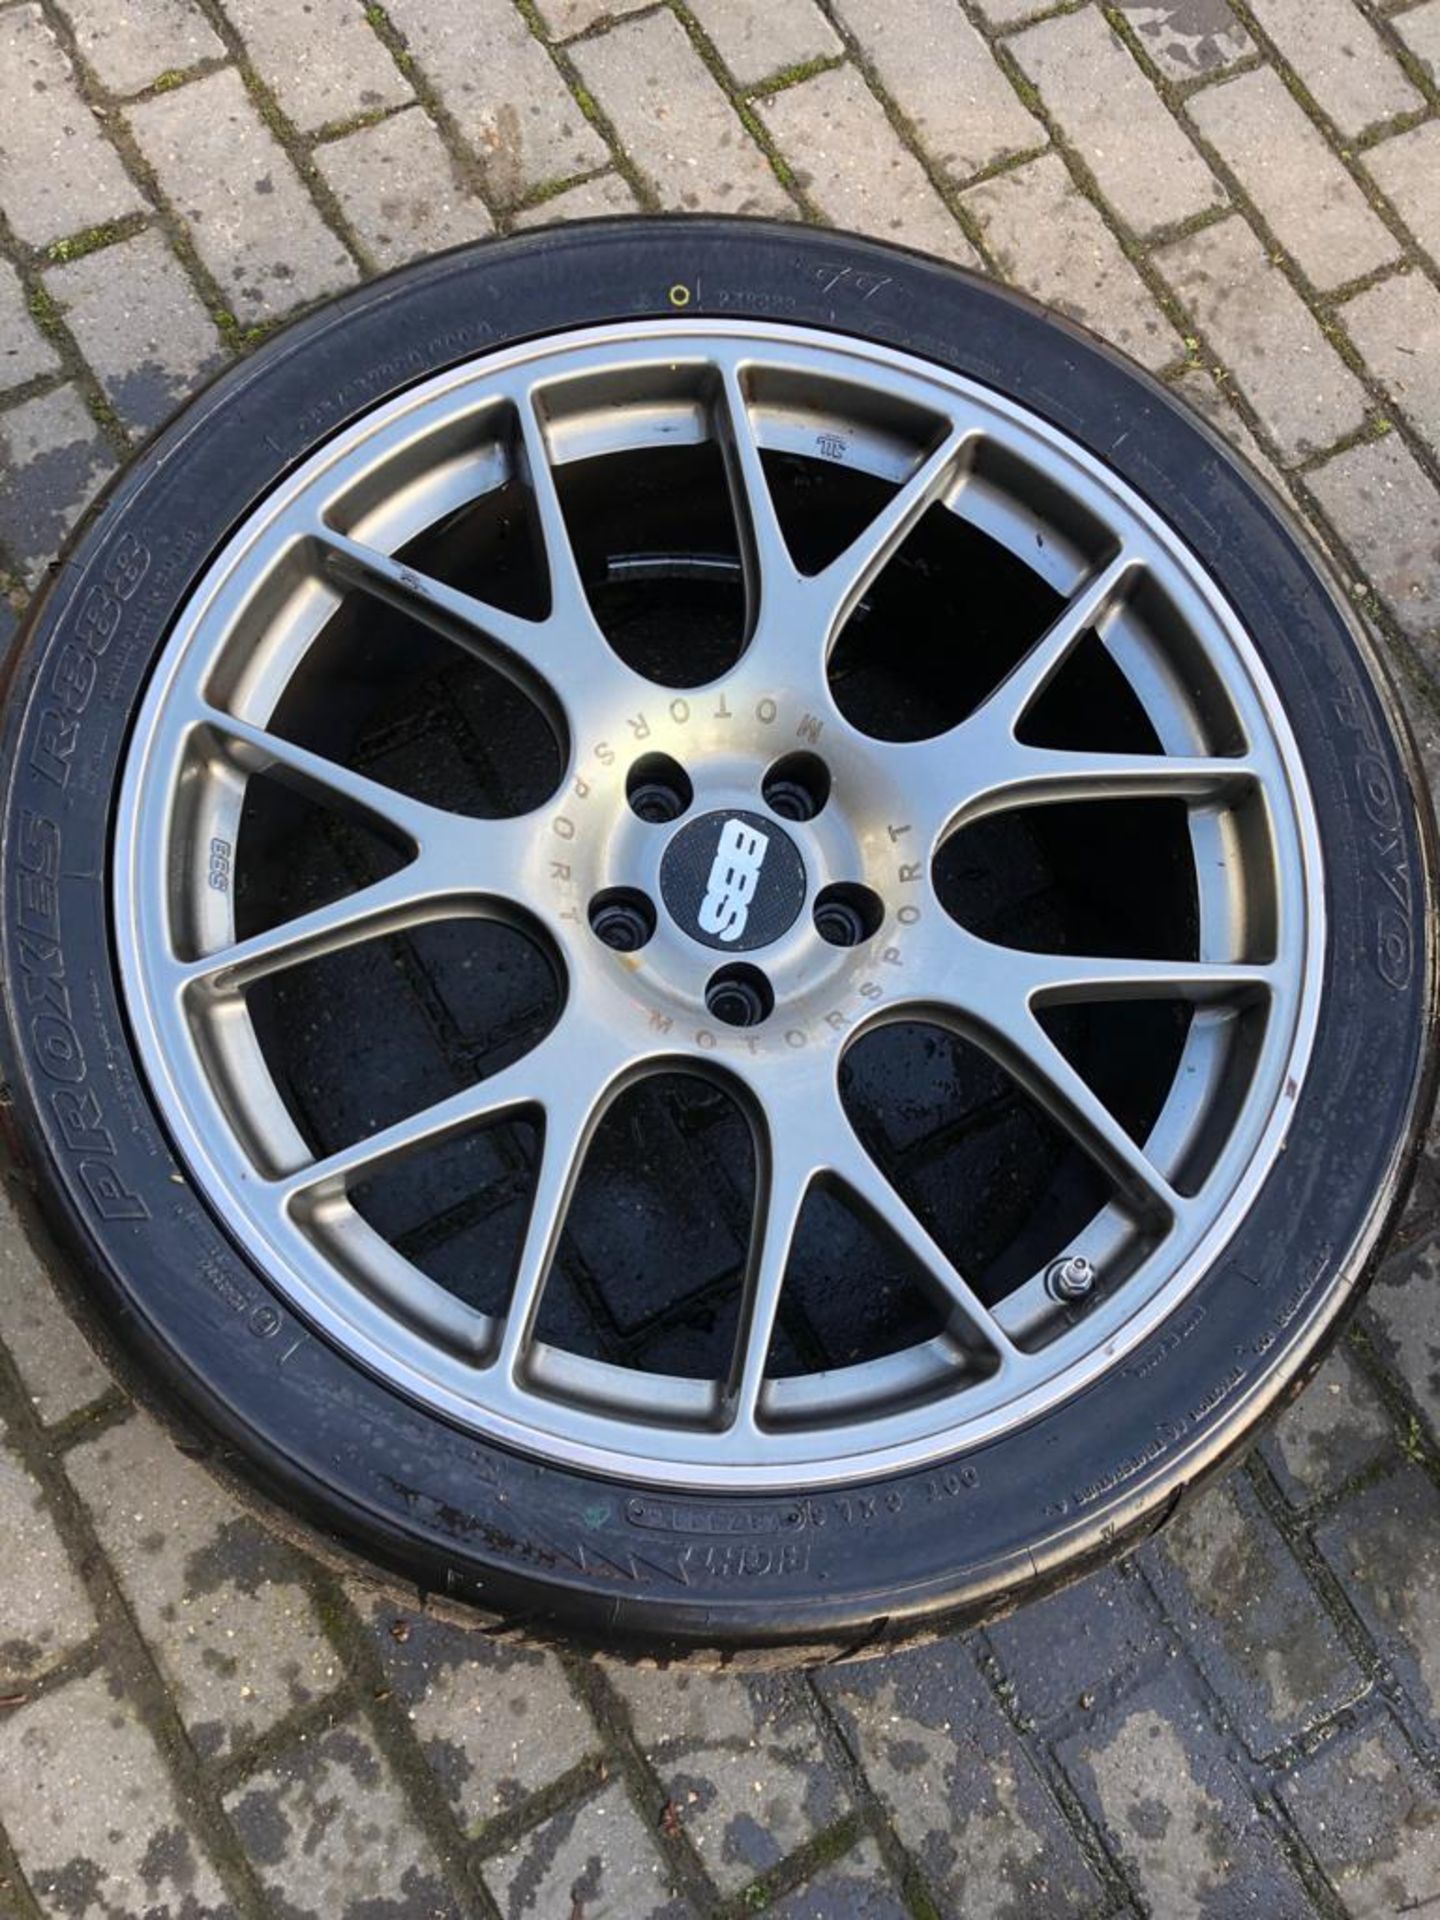 GENUINE BBS CH-R 20" SATIN ANTHRACITE NÜRBURGRING ALLOY WHEELS SET OF 4, TOYO R888 TYRES £3400 NEW - Image 4 of 17